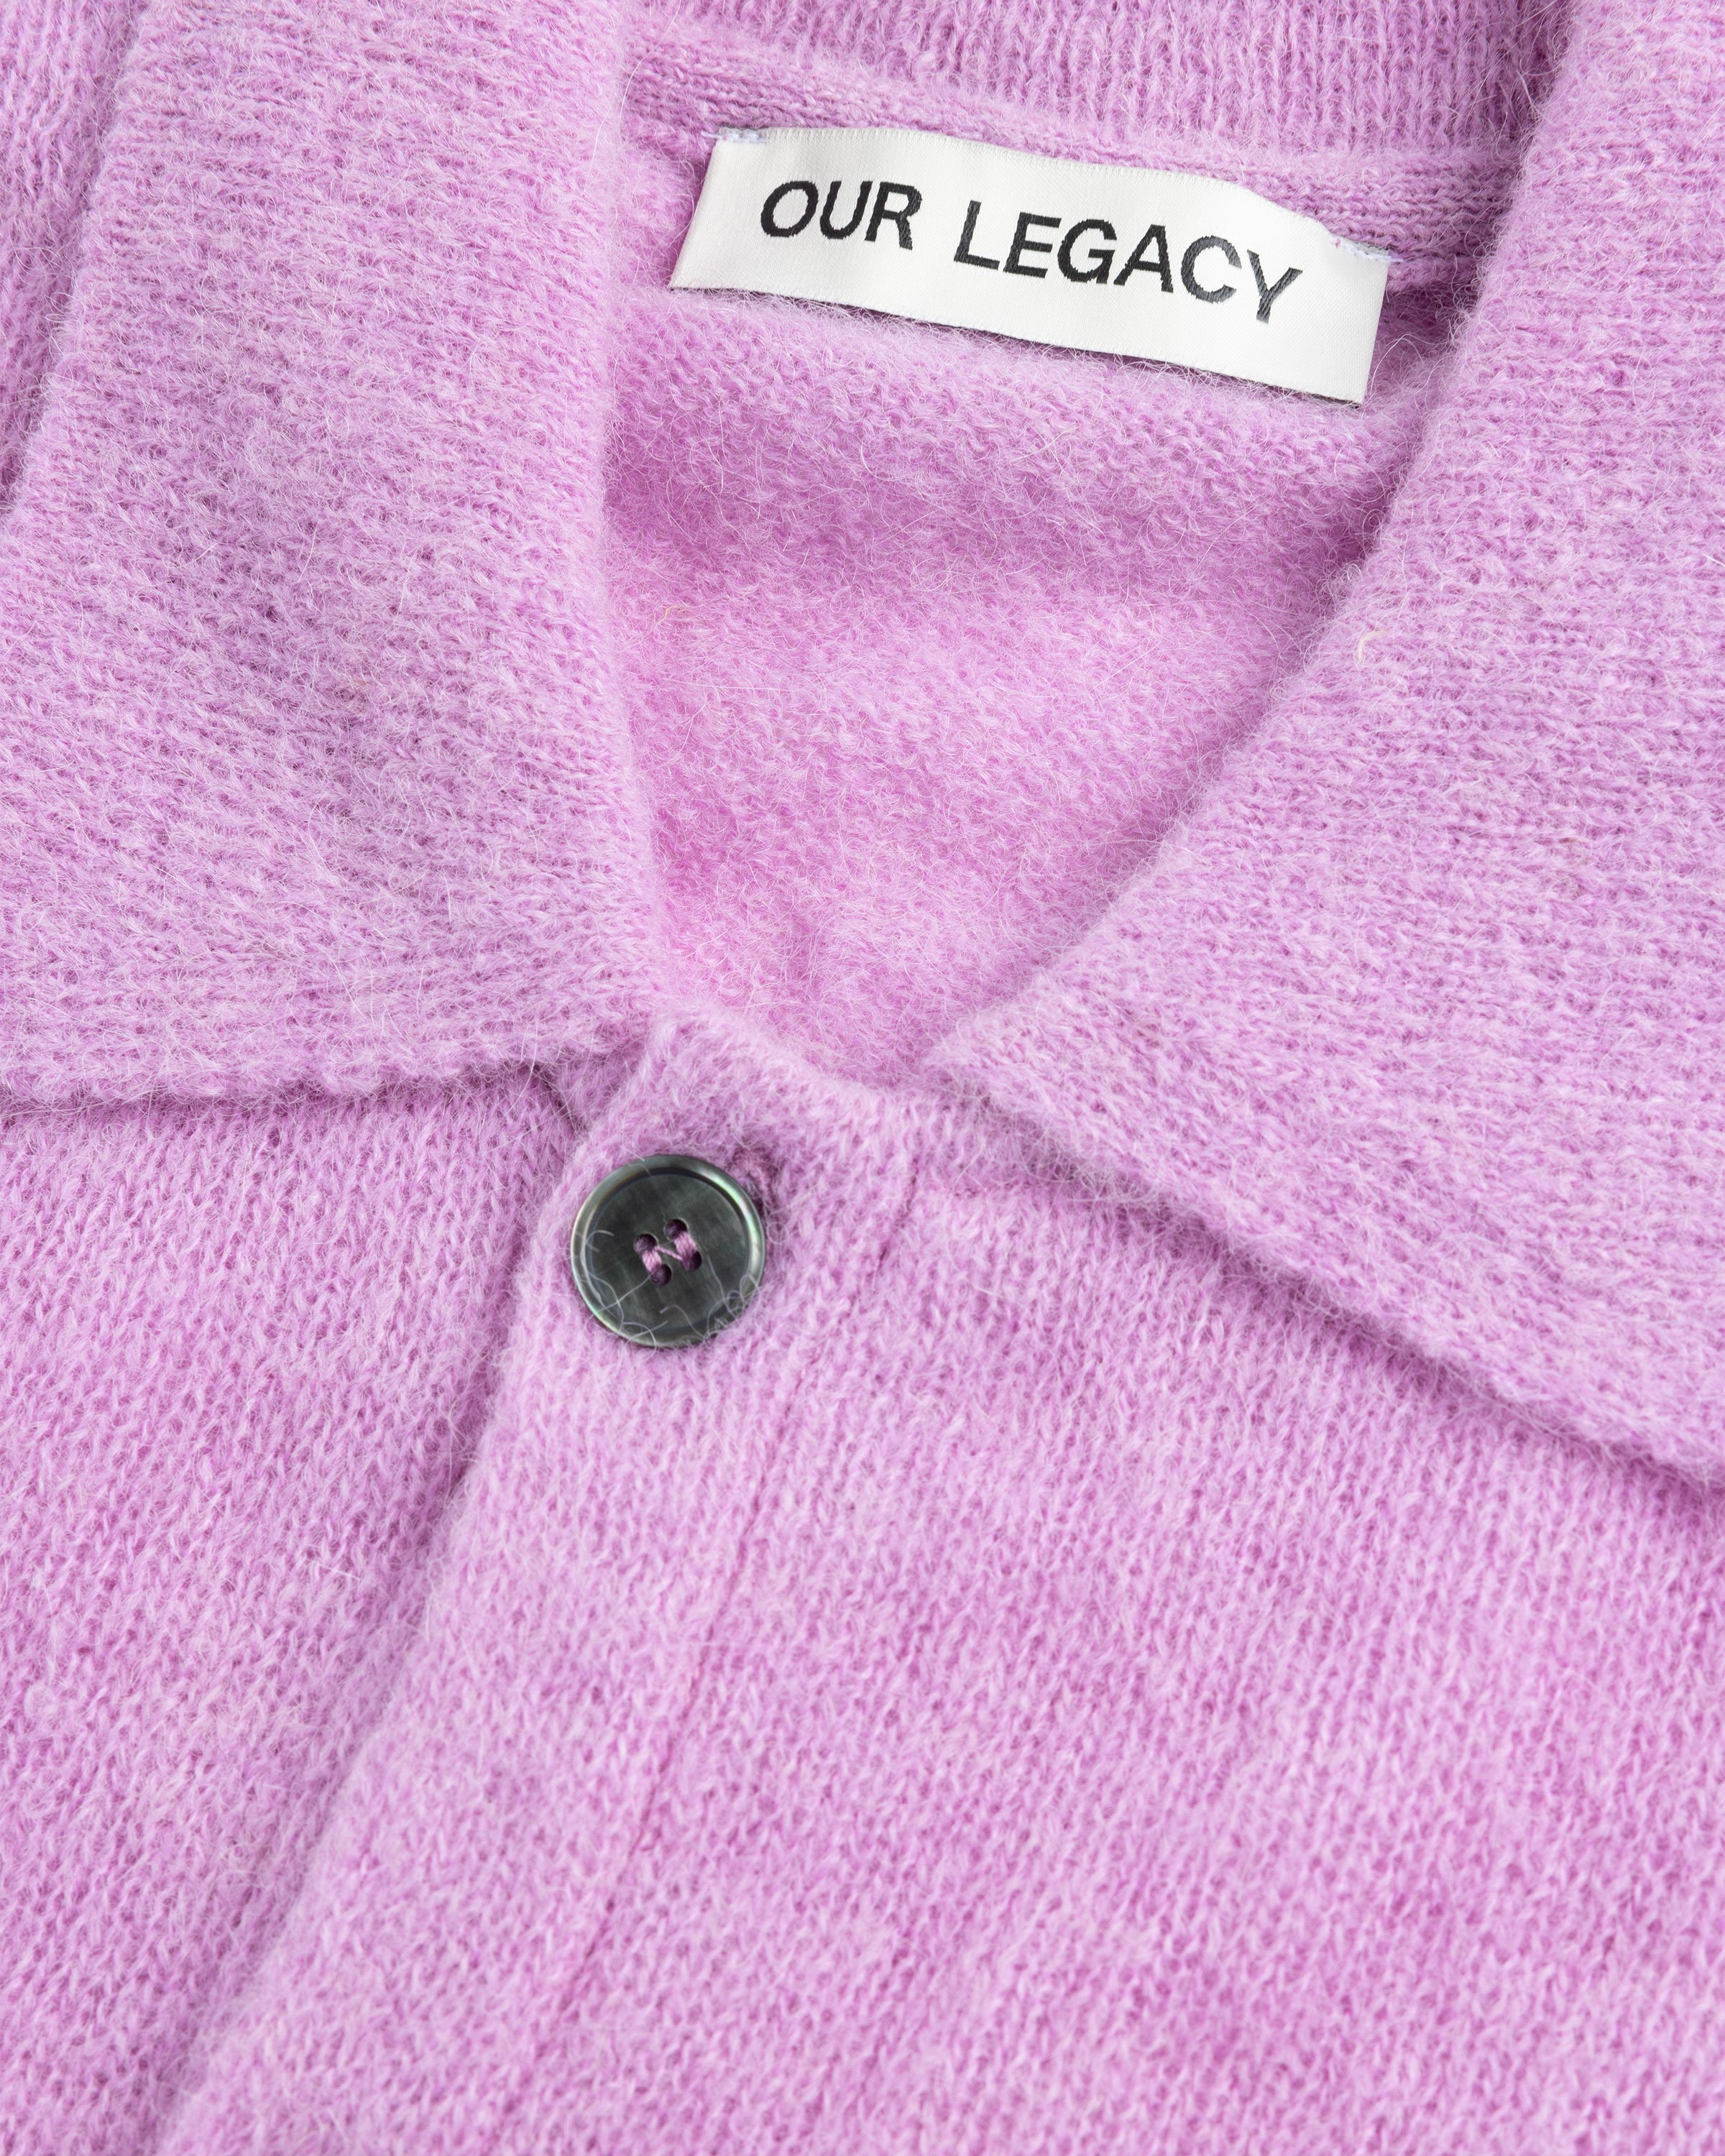 Our Legacy - Evening Polo Candyfloss Fuzzy Alpaca - Clothing - Pink - Image 6